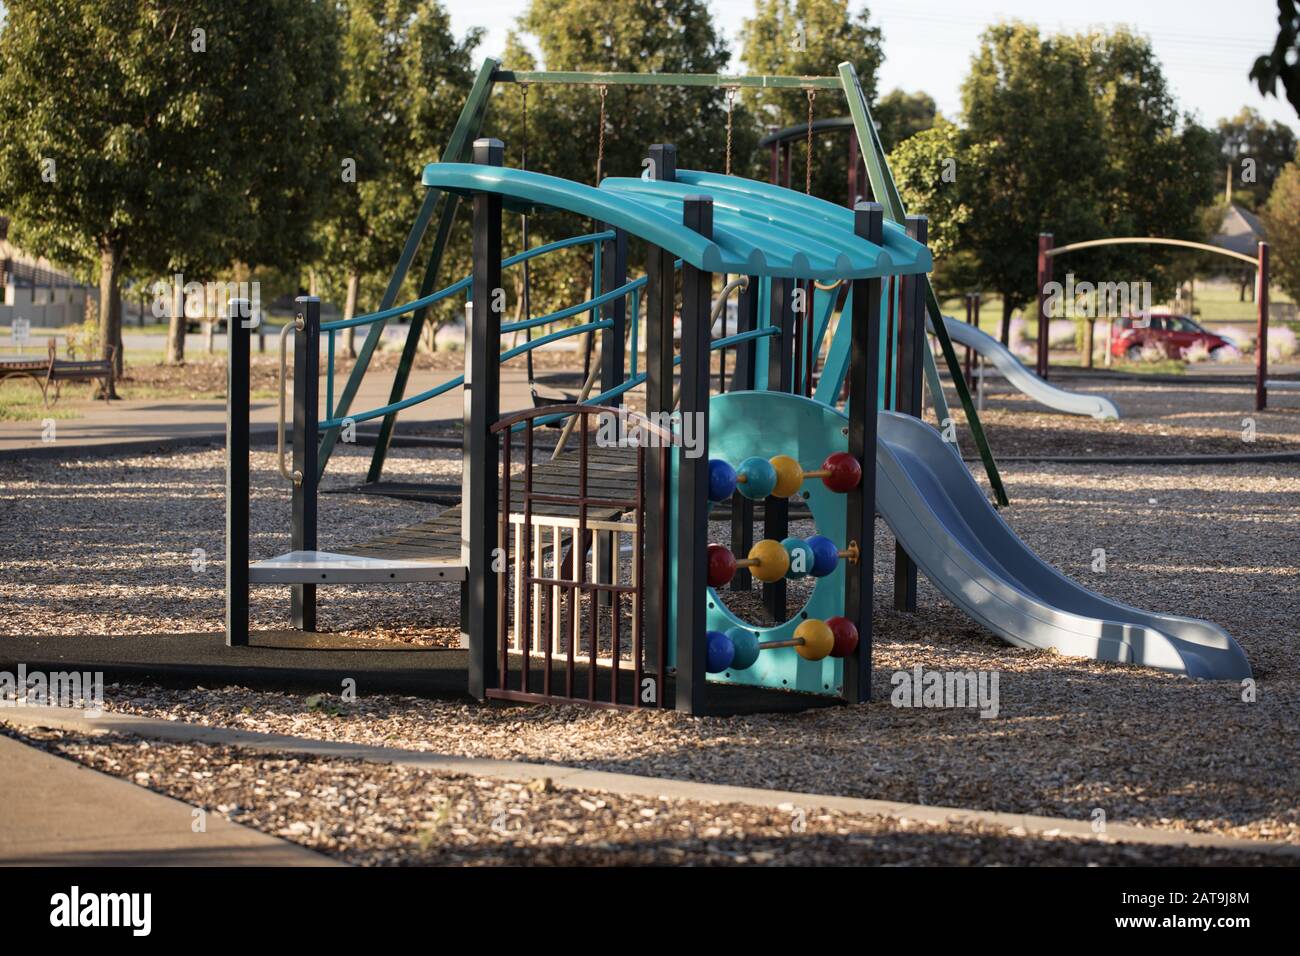 Australian Playground with no children playing in it during the corona virus COVID-19 pandemic Stock Photo